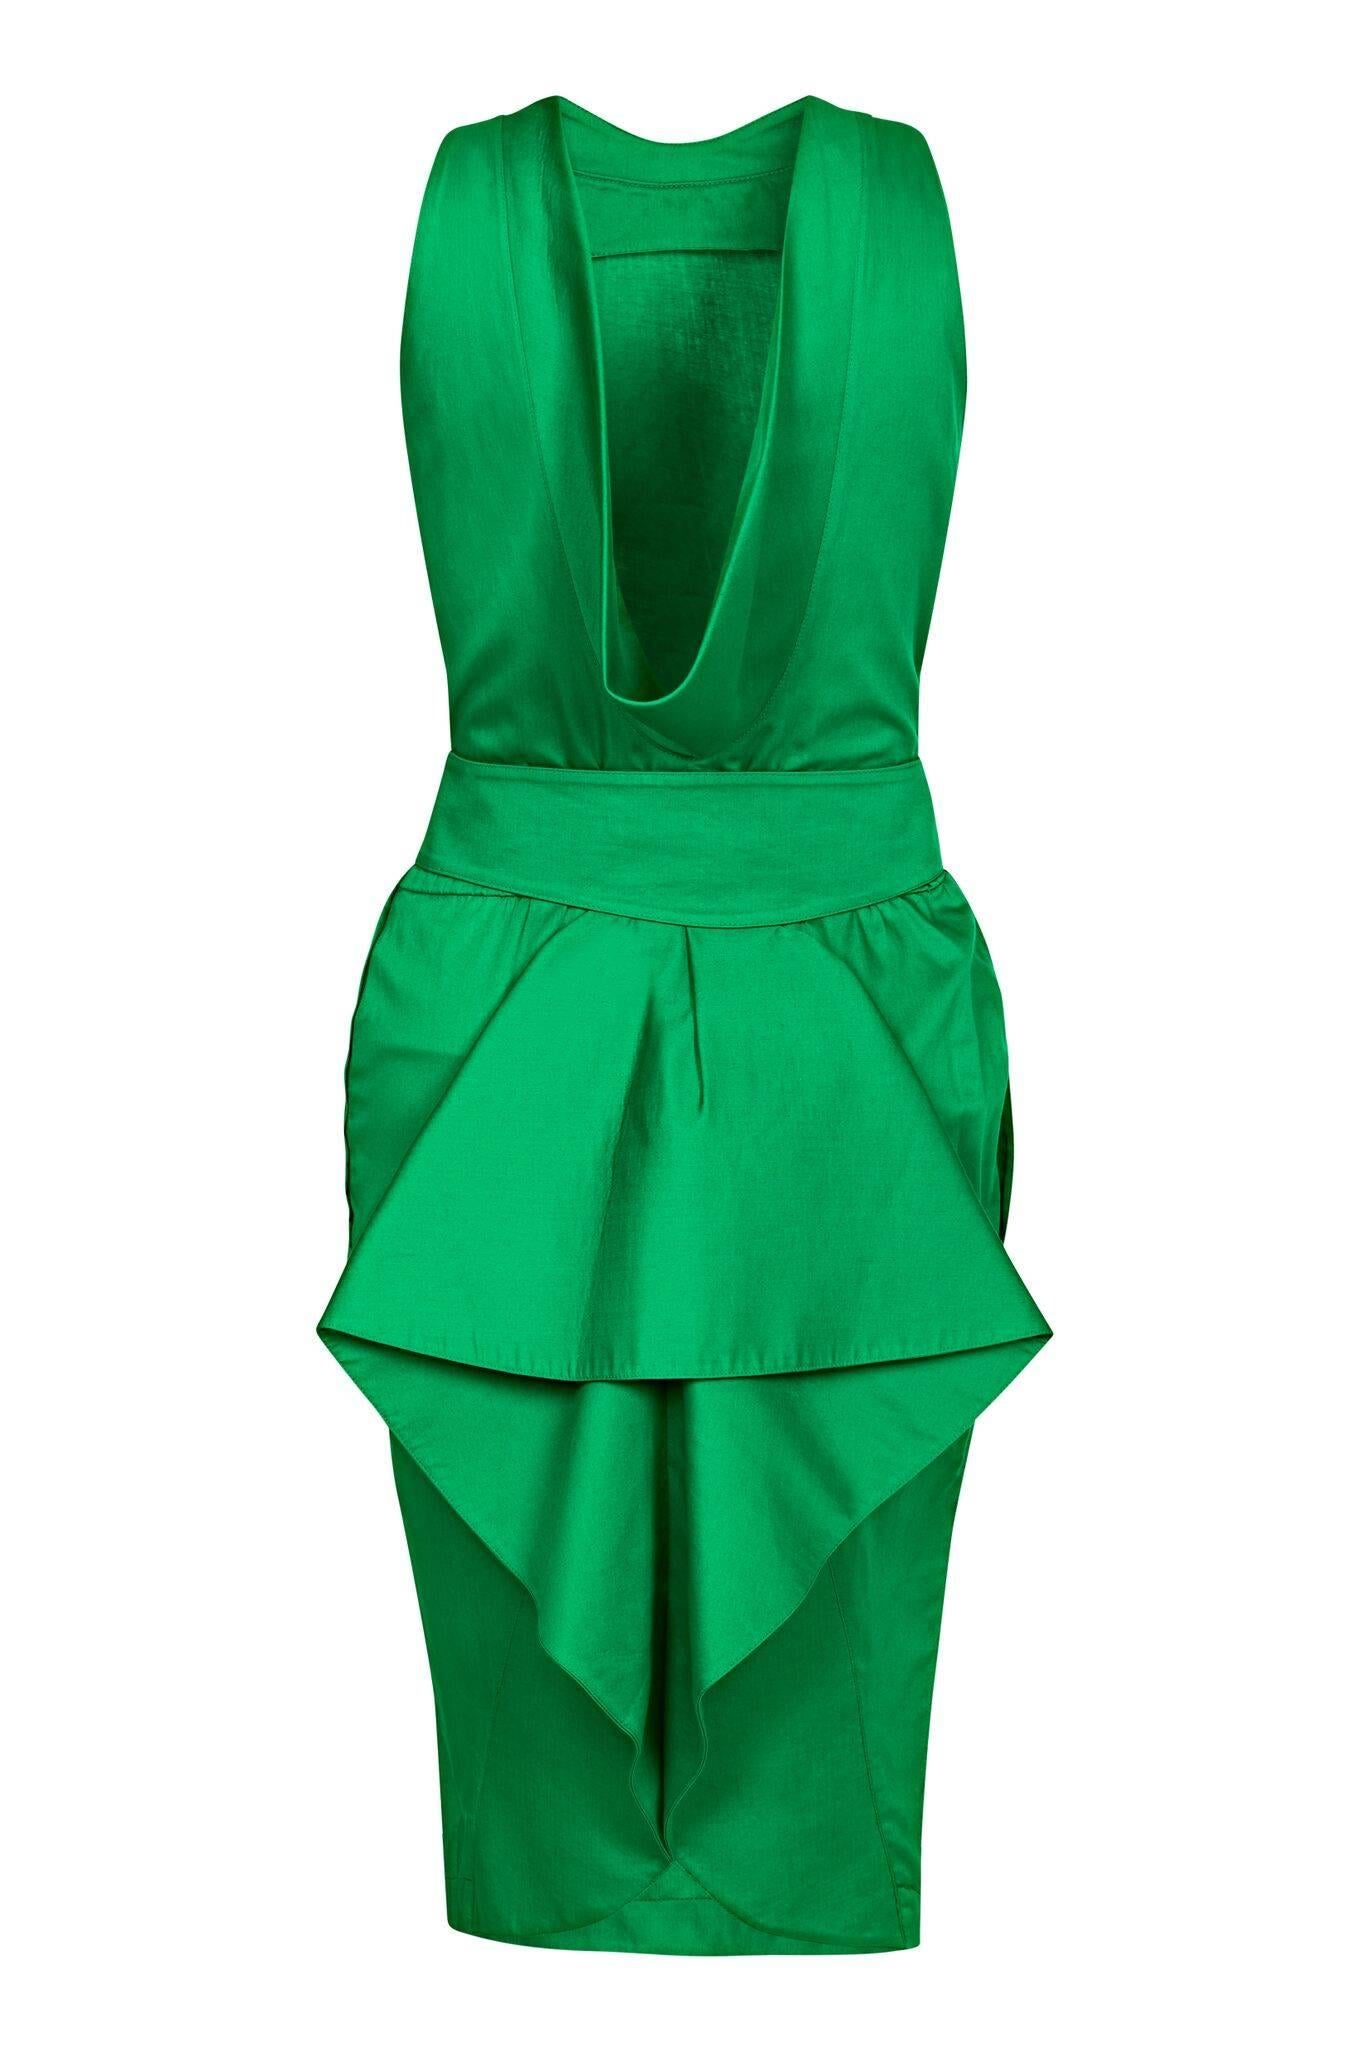 This striking Thierry Mugler 1980s emerald green sateen cotton dress is in great condition and boasts some unusual and arresting design features. Elaborate tailoring and attention to detail refine the deceptively simple silhouette. The arms are